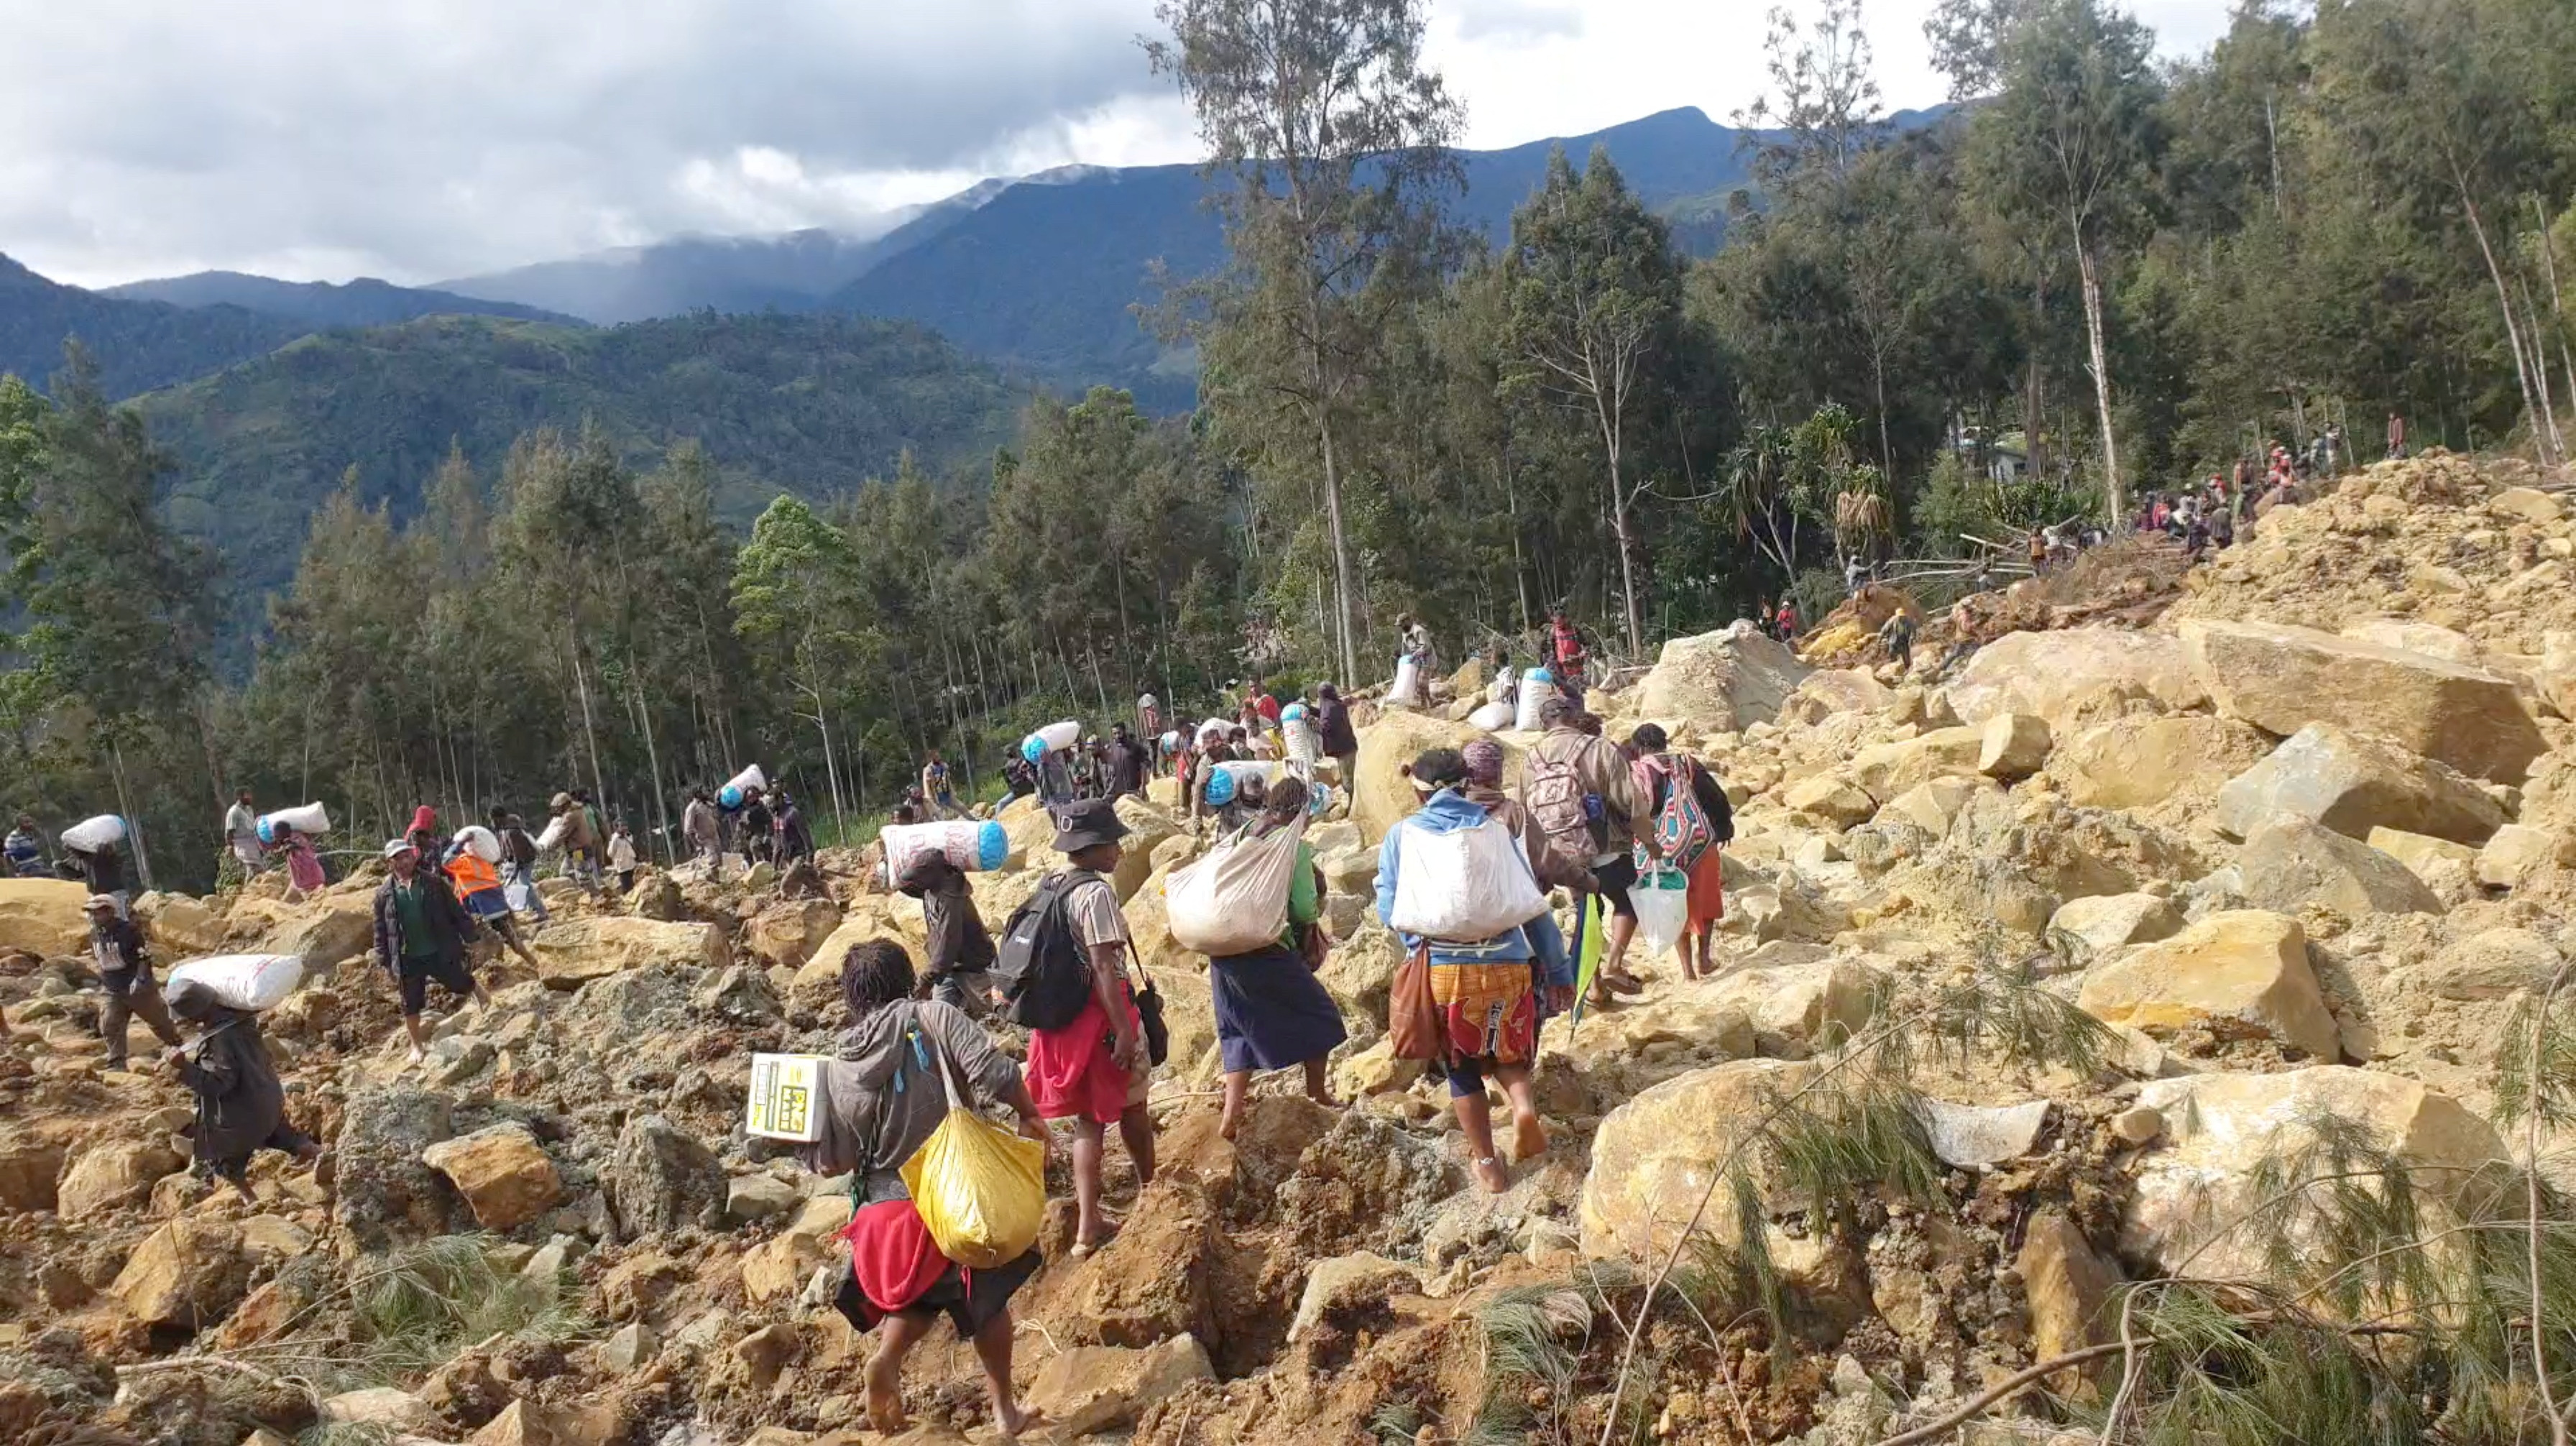 Three bodies retrieved from Papua New Guinea landslide, UN says